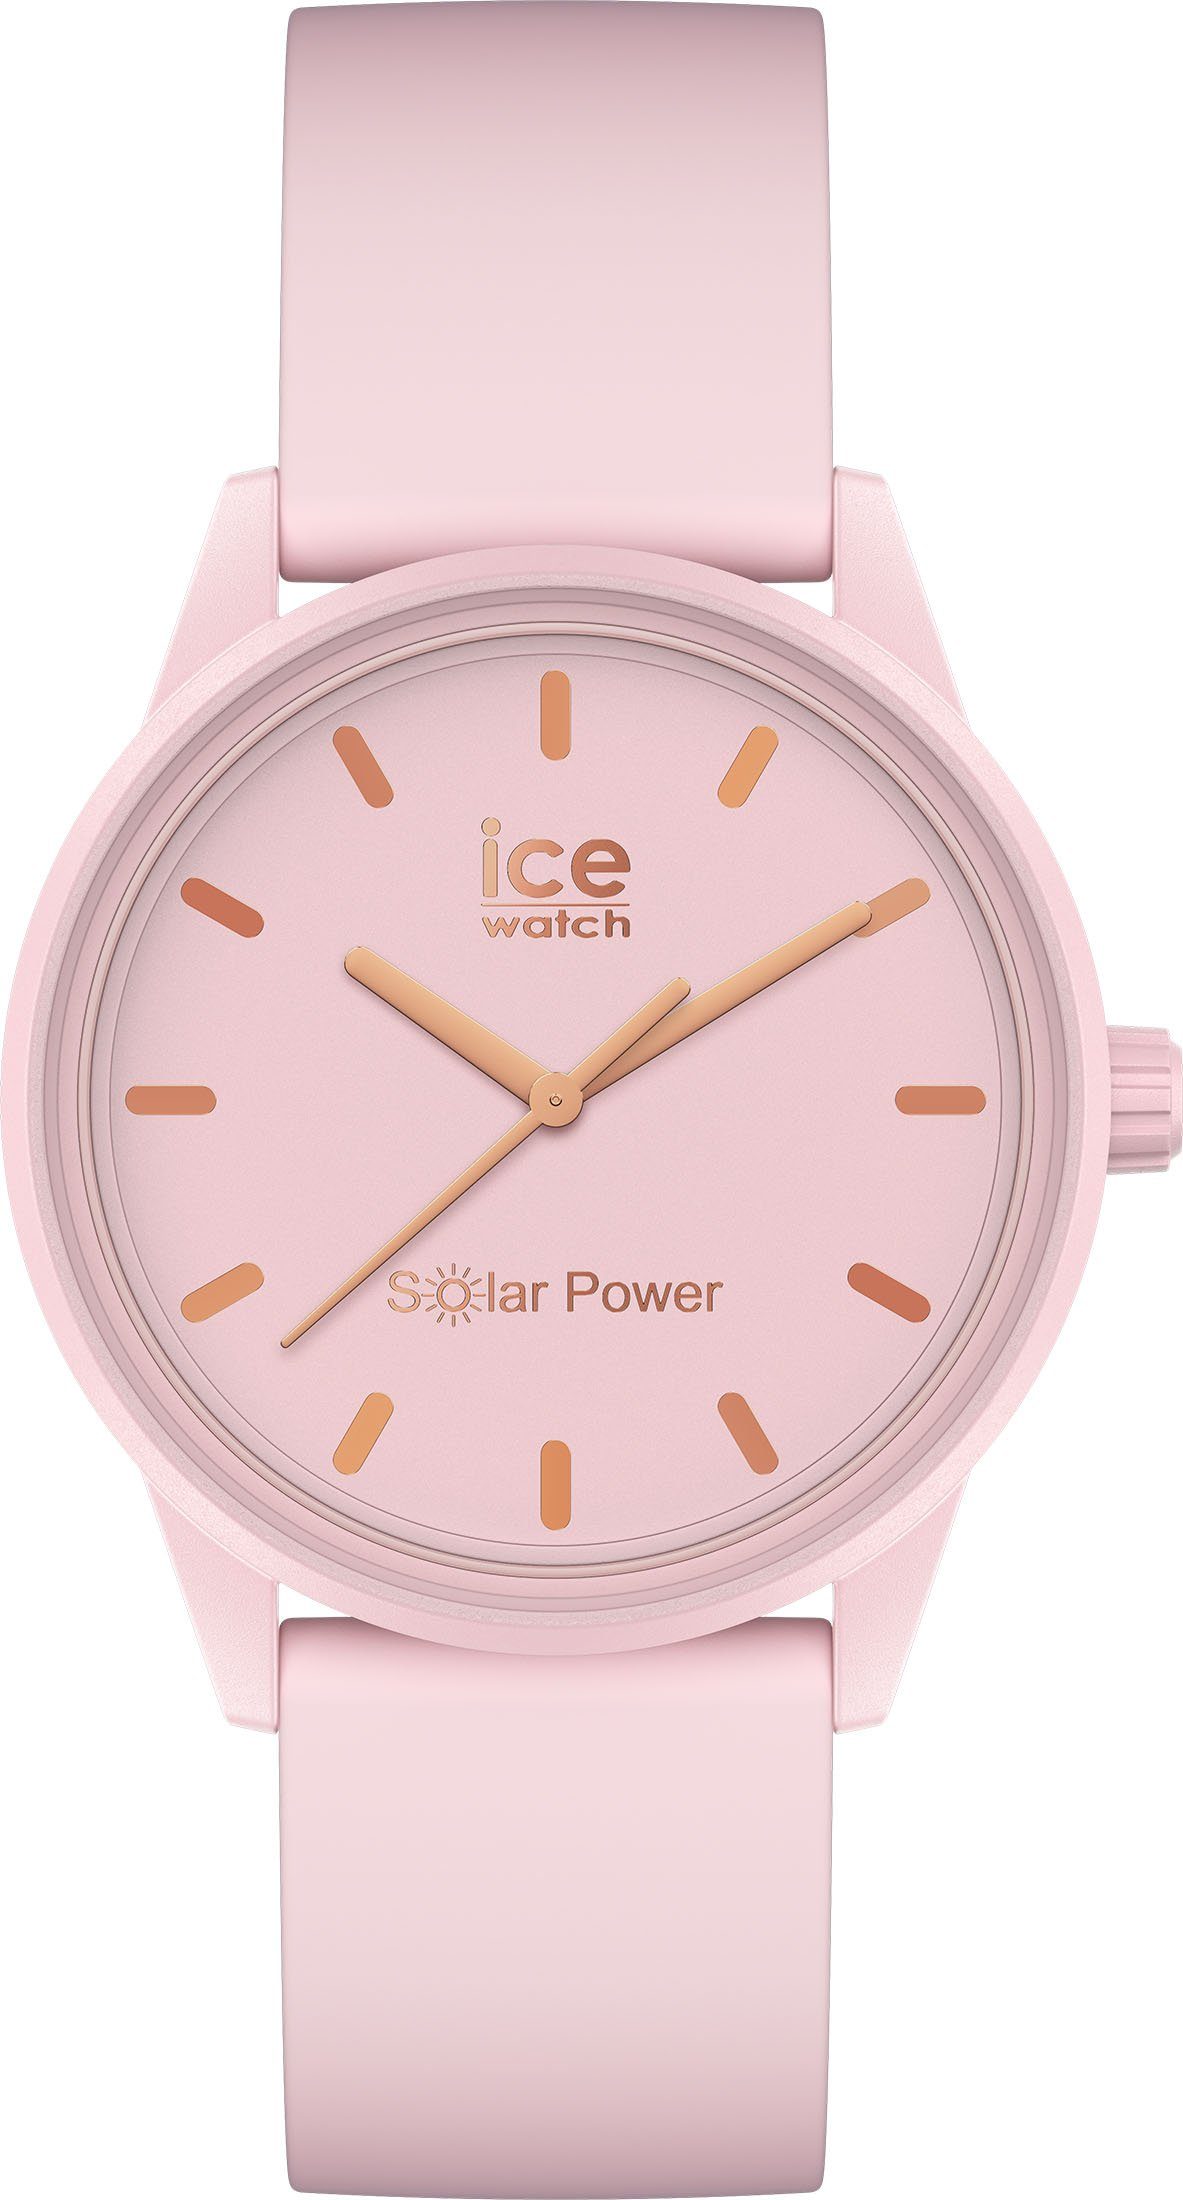 ice-watch Solaruhr ICE solar power - Pink lady, 018479